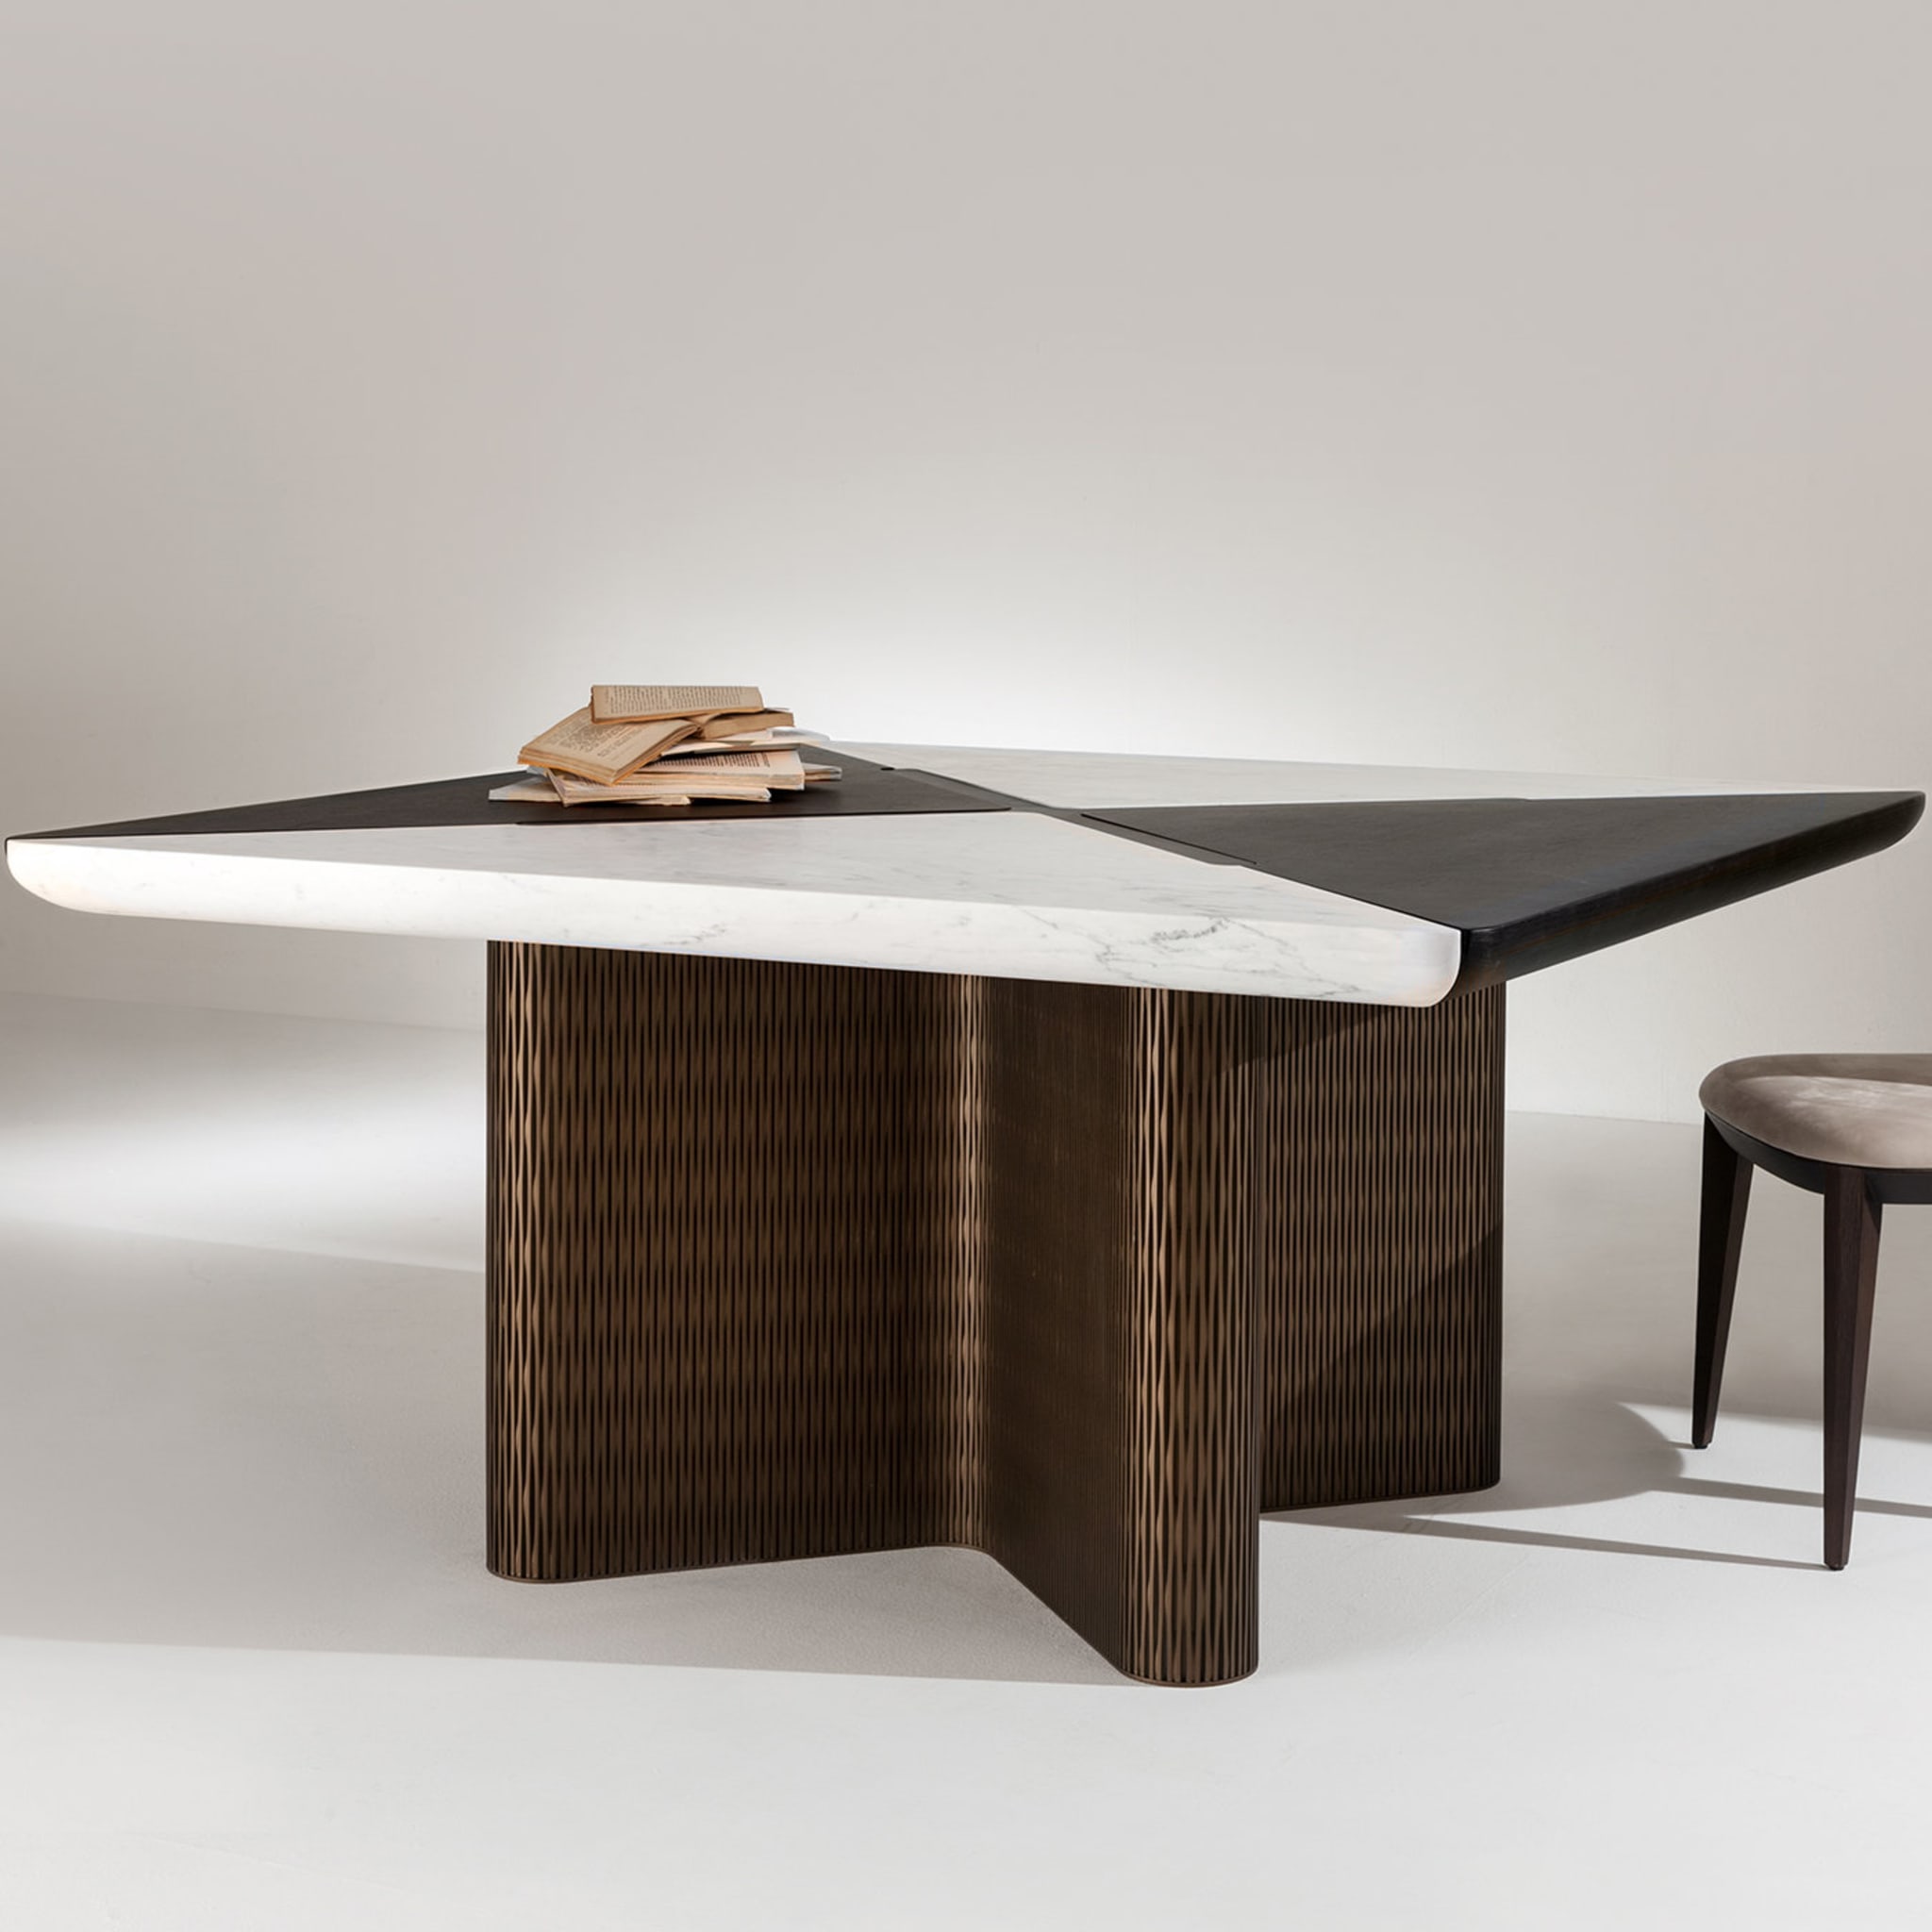 Infinity Square Dining Table by Cesare Arosio - Alternative view 1